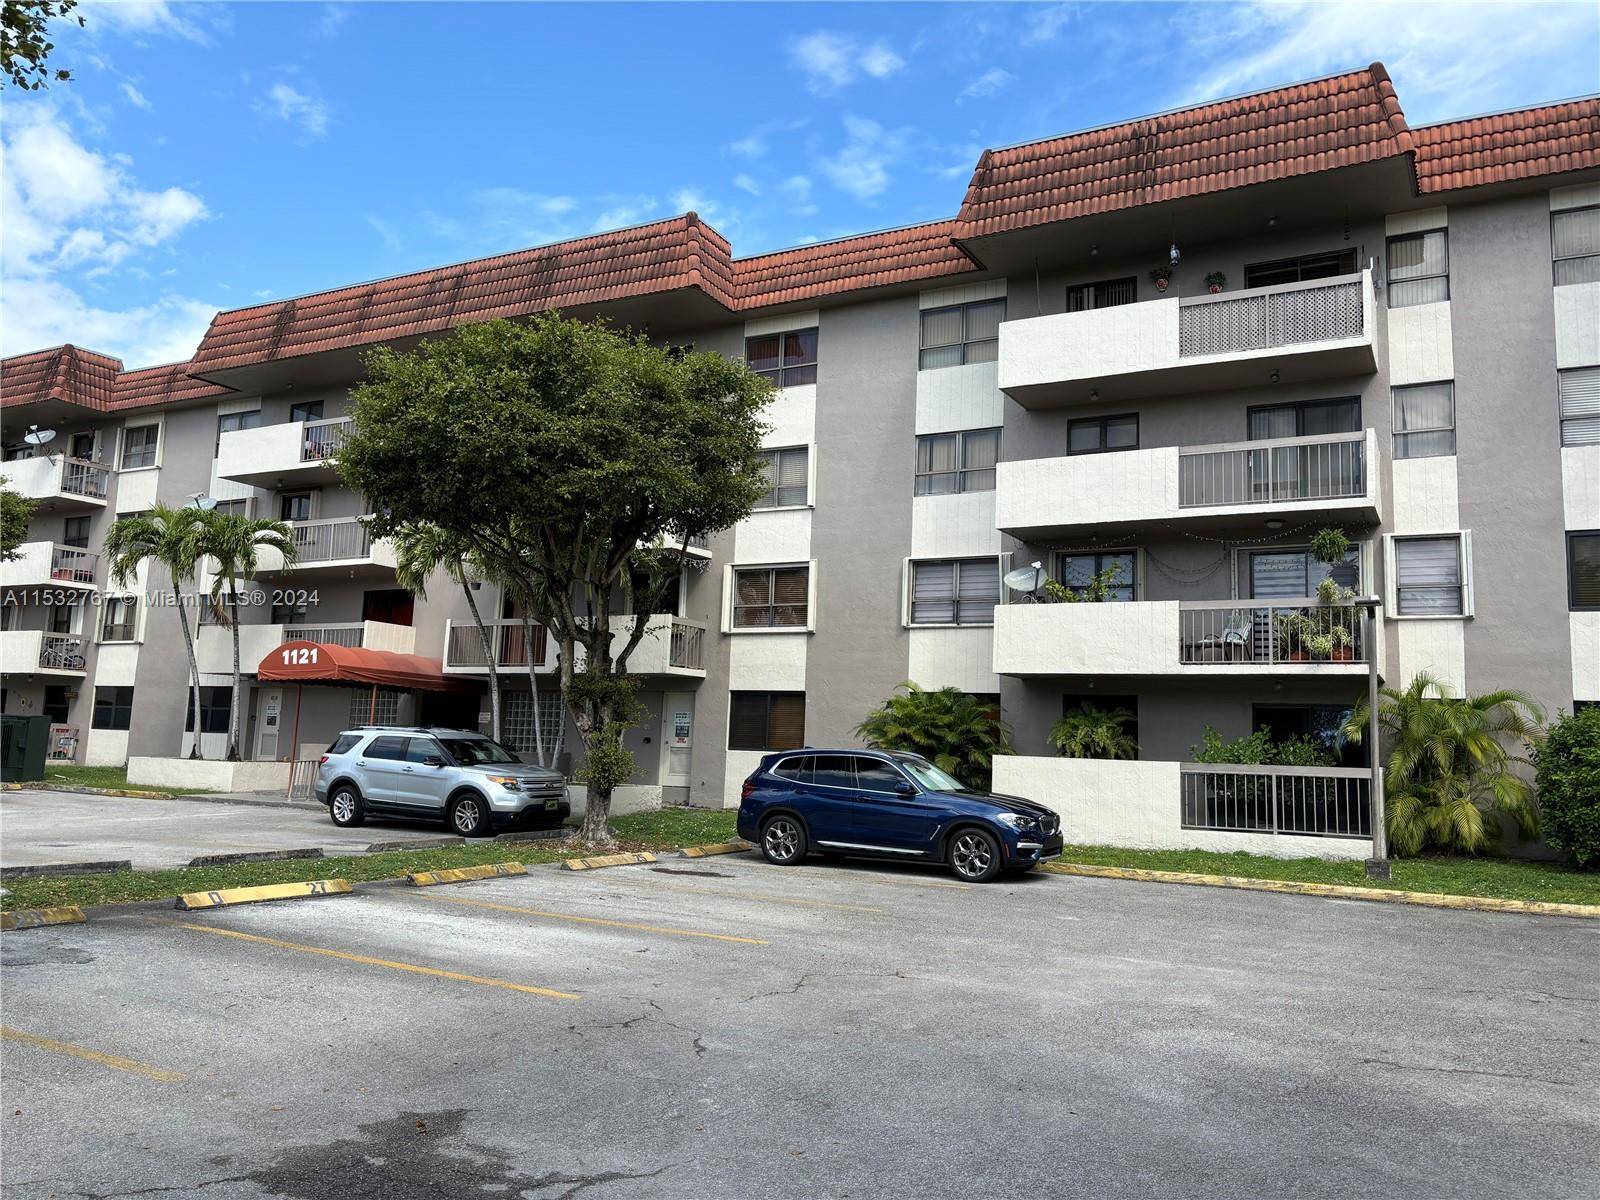 INVESTORS ONLY, 3 2 CORNER UNIT FULLY REMODELED, NEW KITCHEN CABINETS, NEW BATHROOMS, NEW FLOORS, NEW APPLIANCES STAINLESS STEEL, 4TH FLOOR BUILDING HAS ELEVATOR, NEW FULL SIZE WASHER AND DRYER, ...